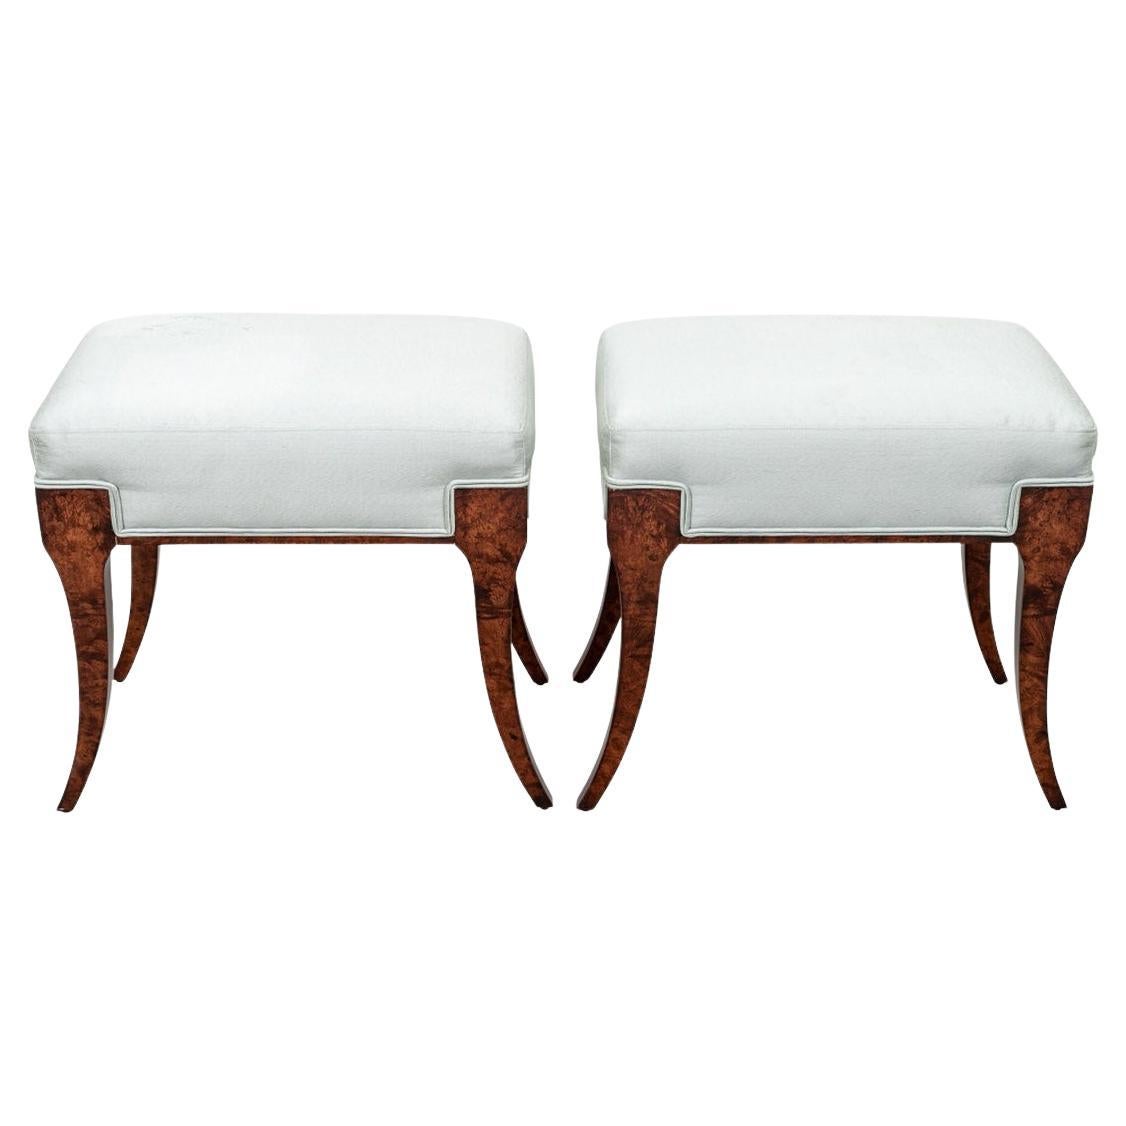 Exceptional Pair of Klismos Style Benches by William Switzer